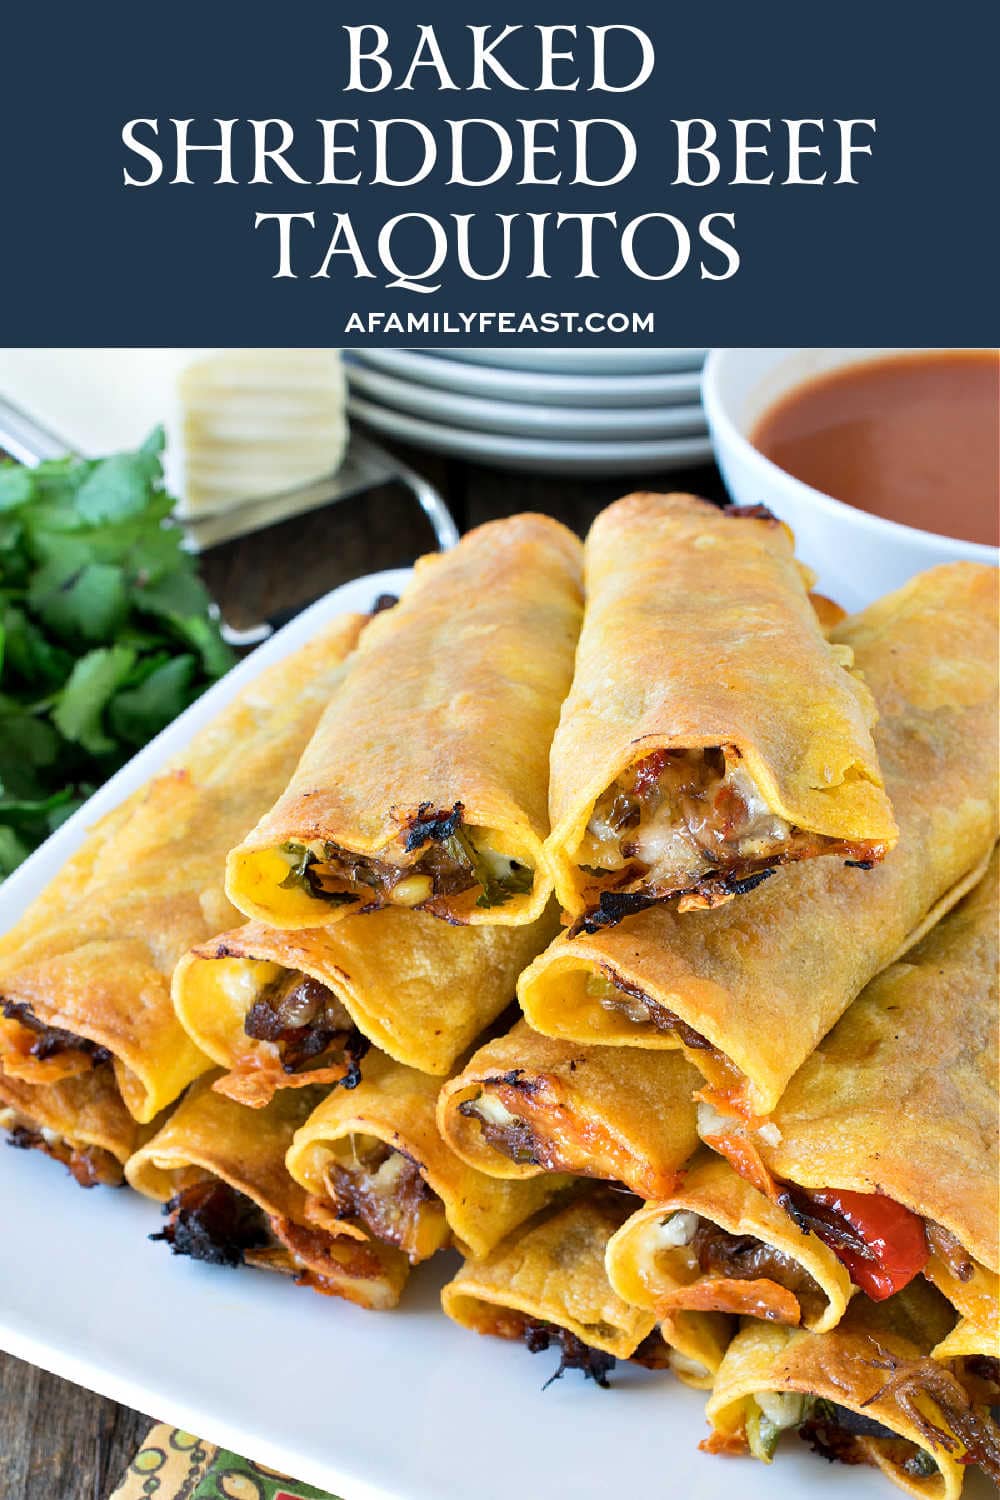 Baked Shredded Beef Taquitos